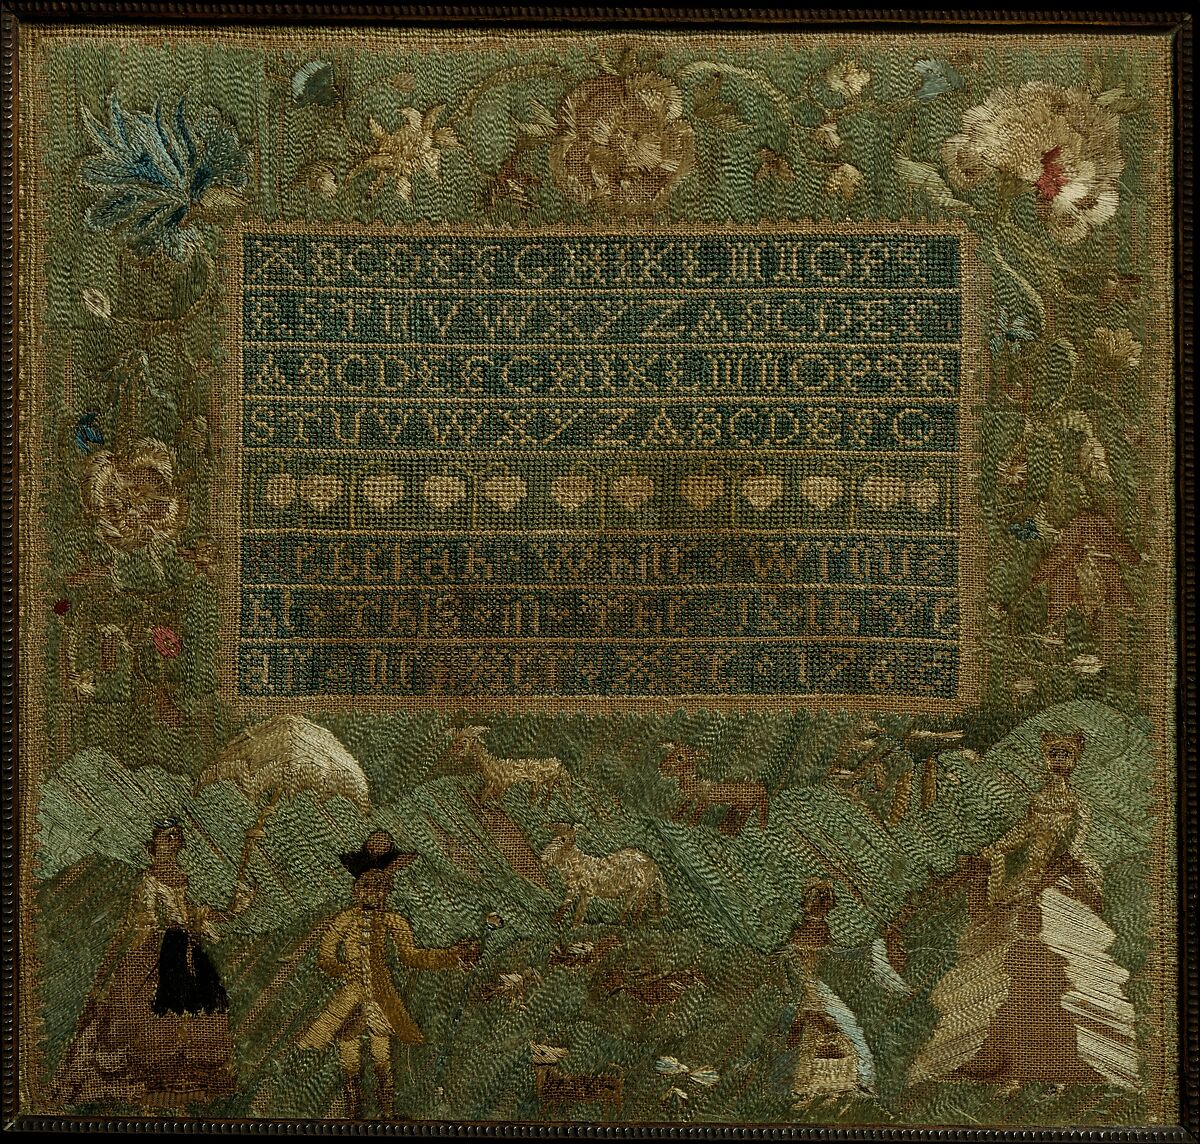 Embroidered Sampler, Rebekah White (1753–1823), Silk embroidery on linen, American 